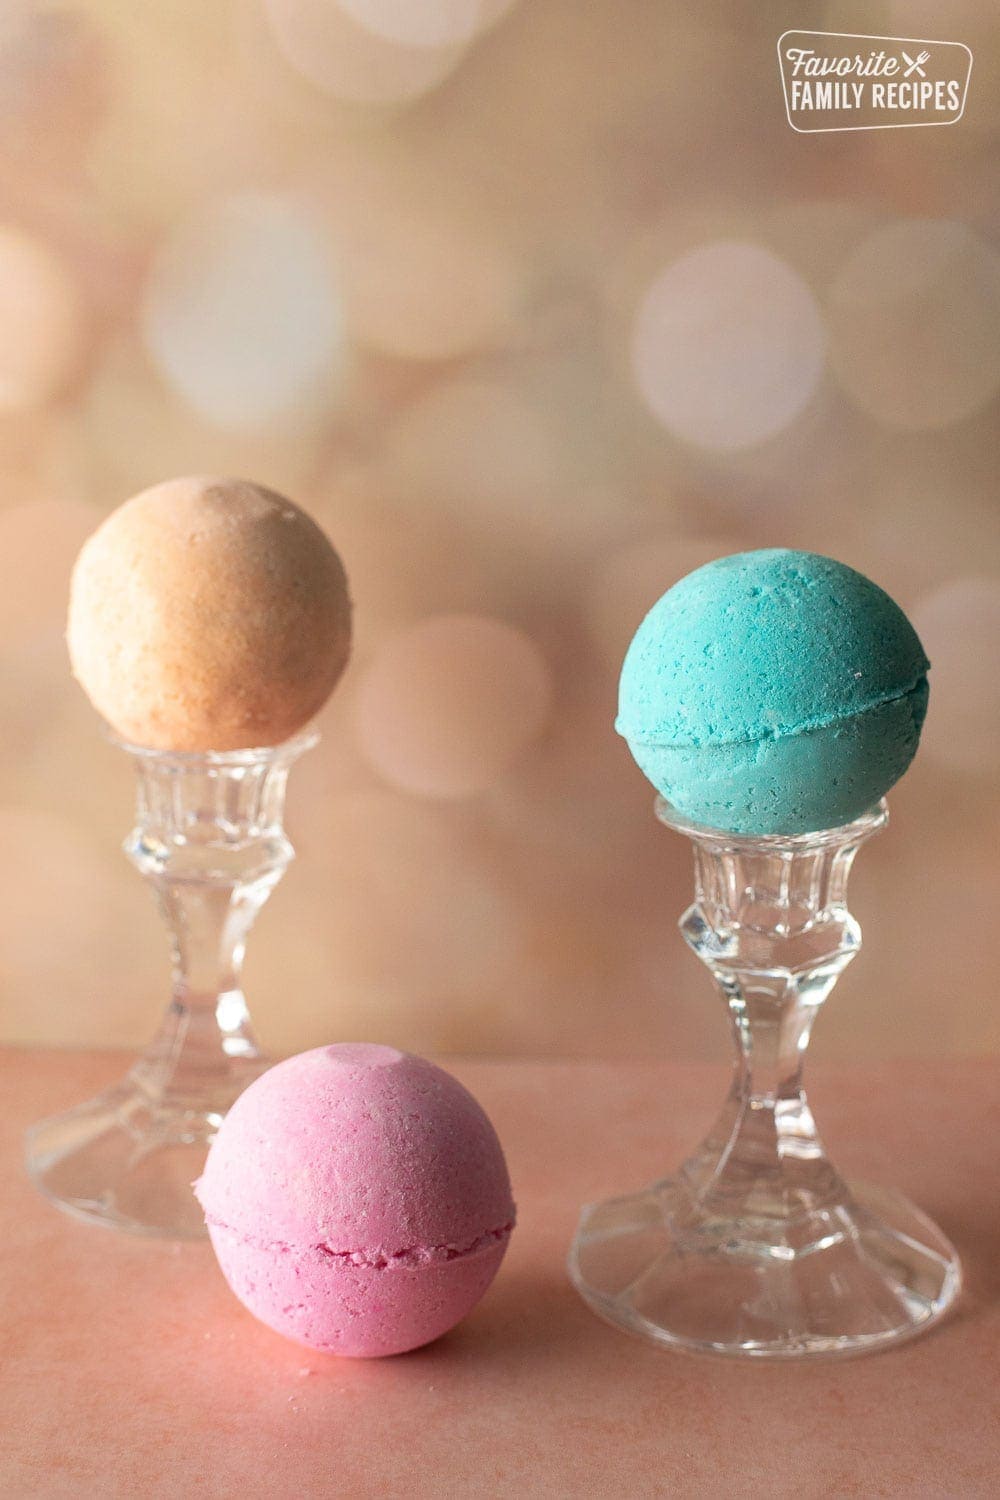 How To Make Bath Bombs (Step-by-Step Guide) - Parade